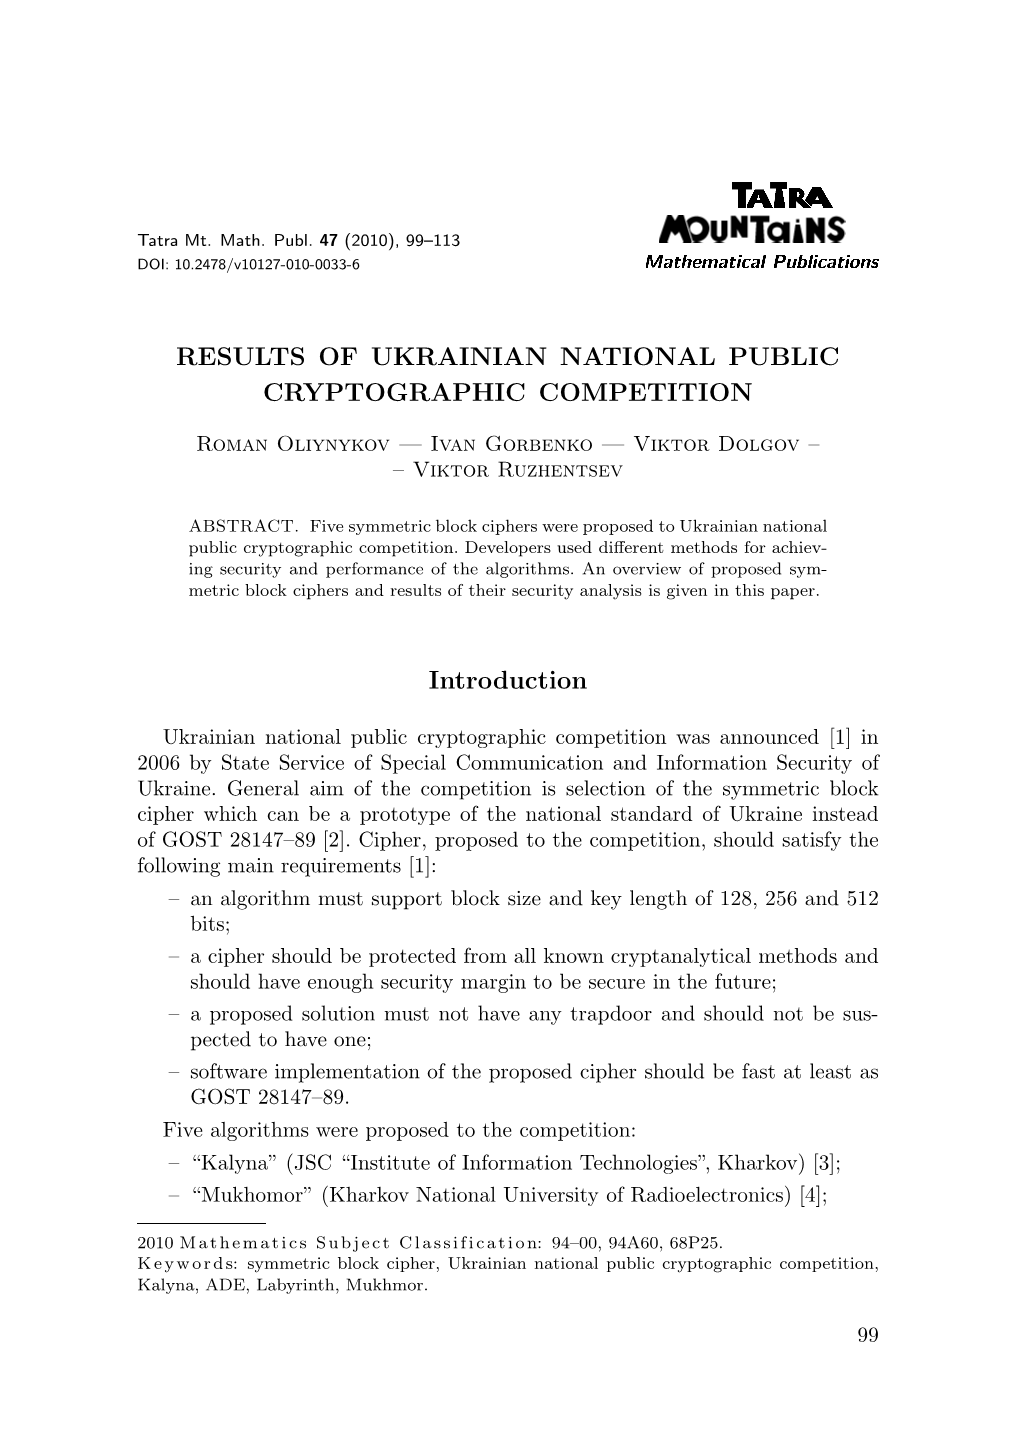 Results of Ukrainian National Public Cryptographic Competition